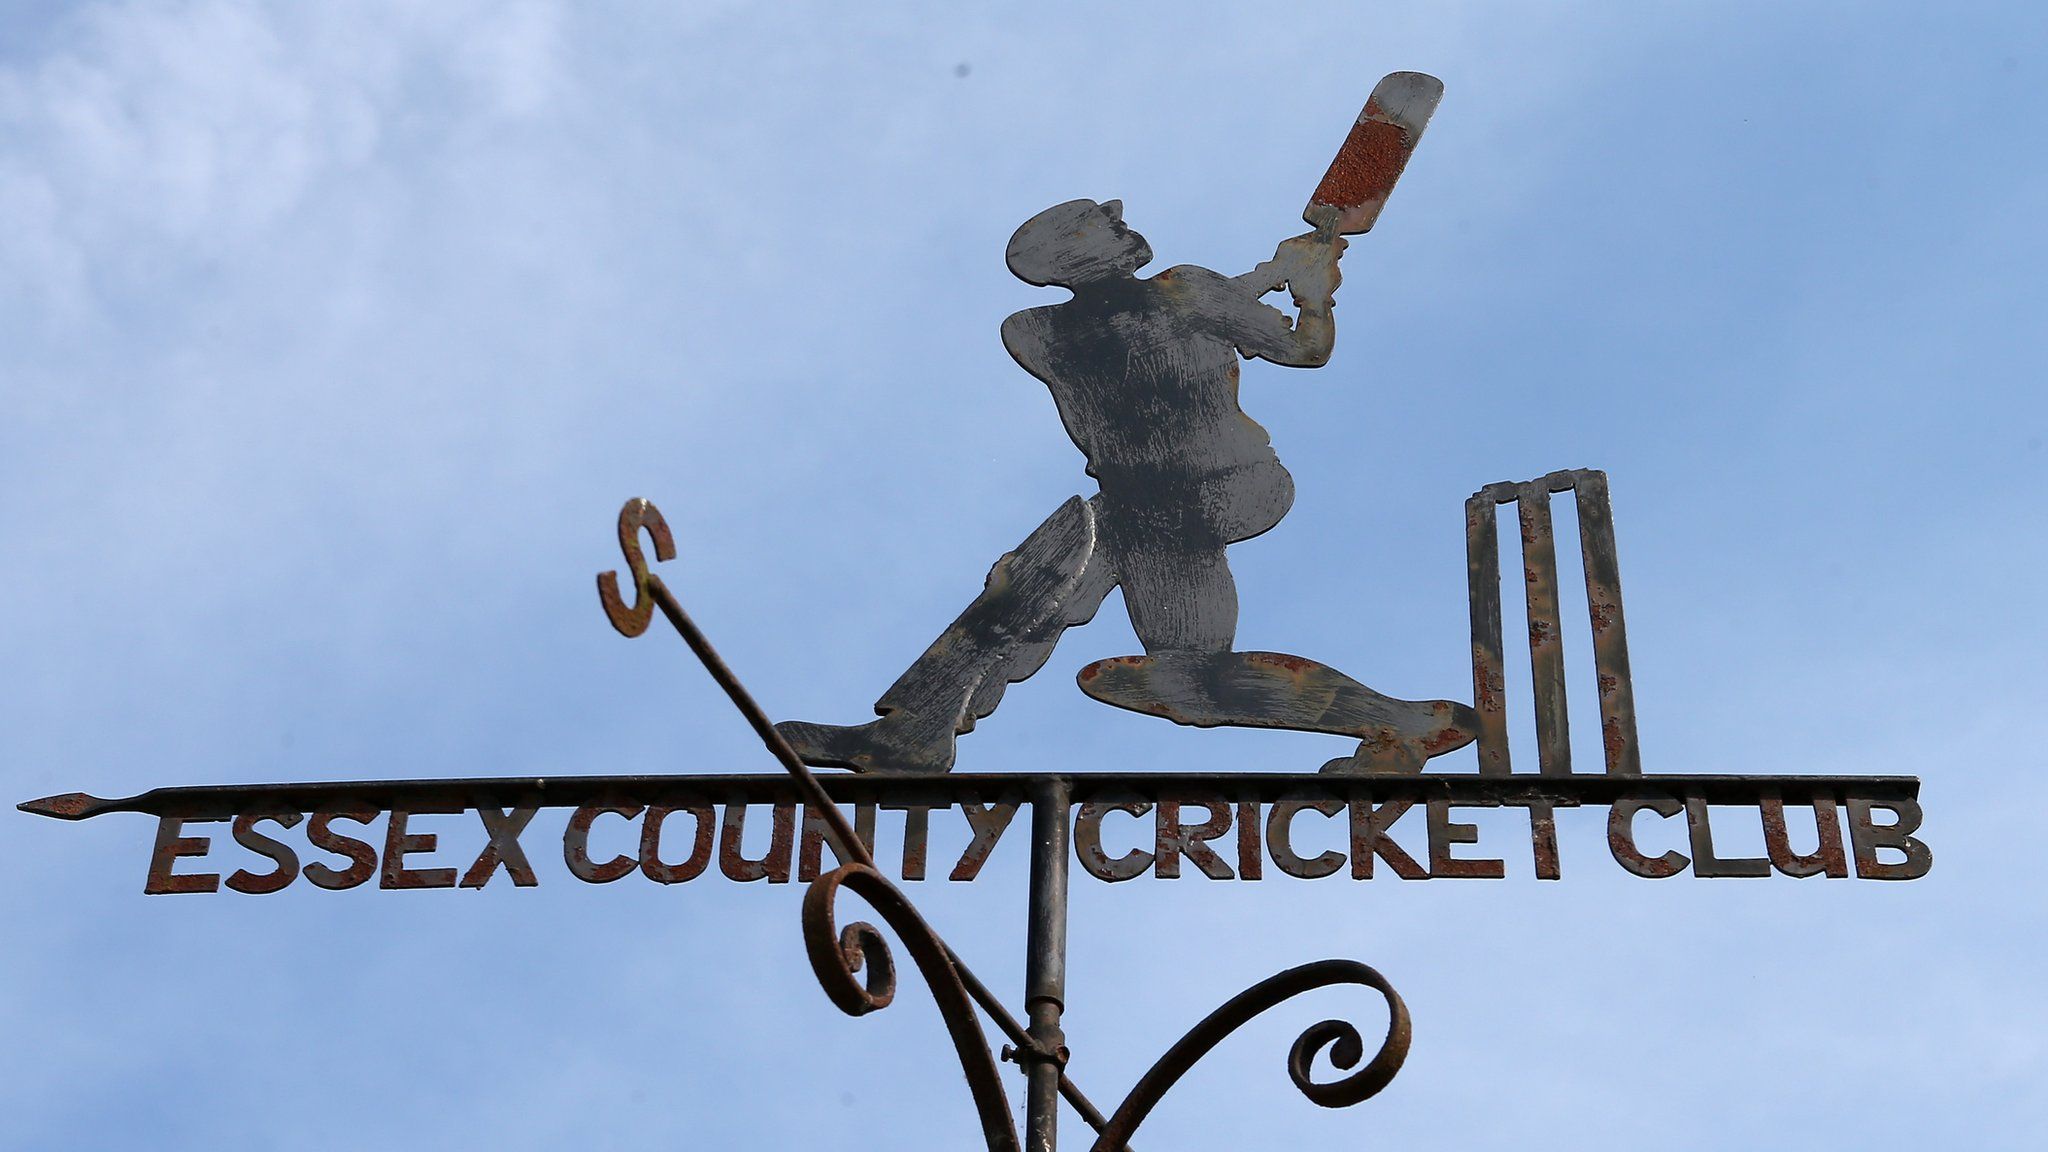 A weather vane of a batter at Essex County Cricket Club